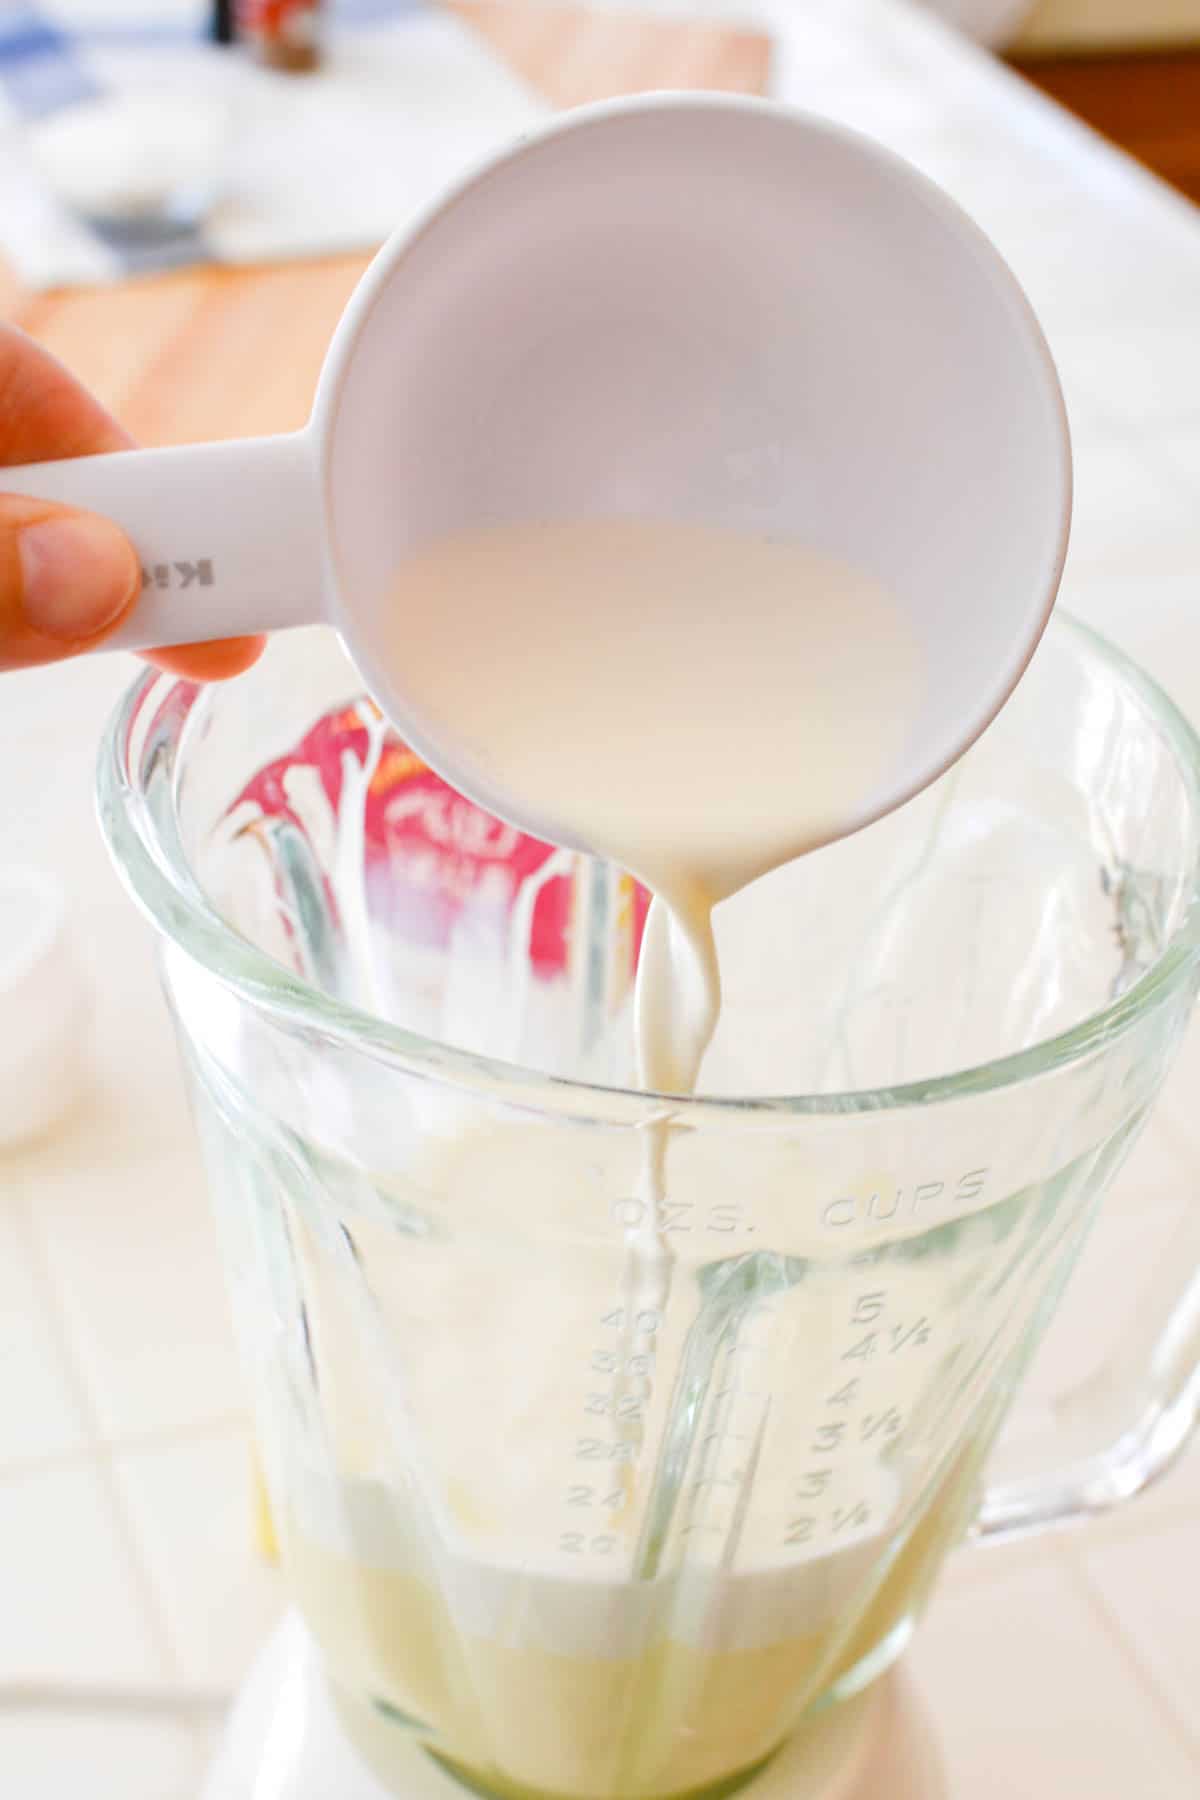 Make your own coffee creamer in a pinch - CNET